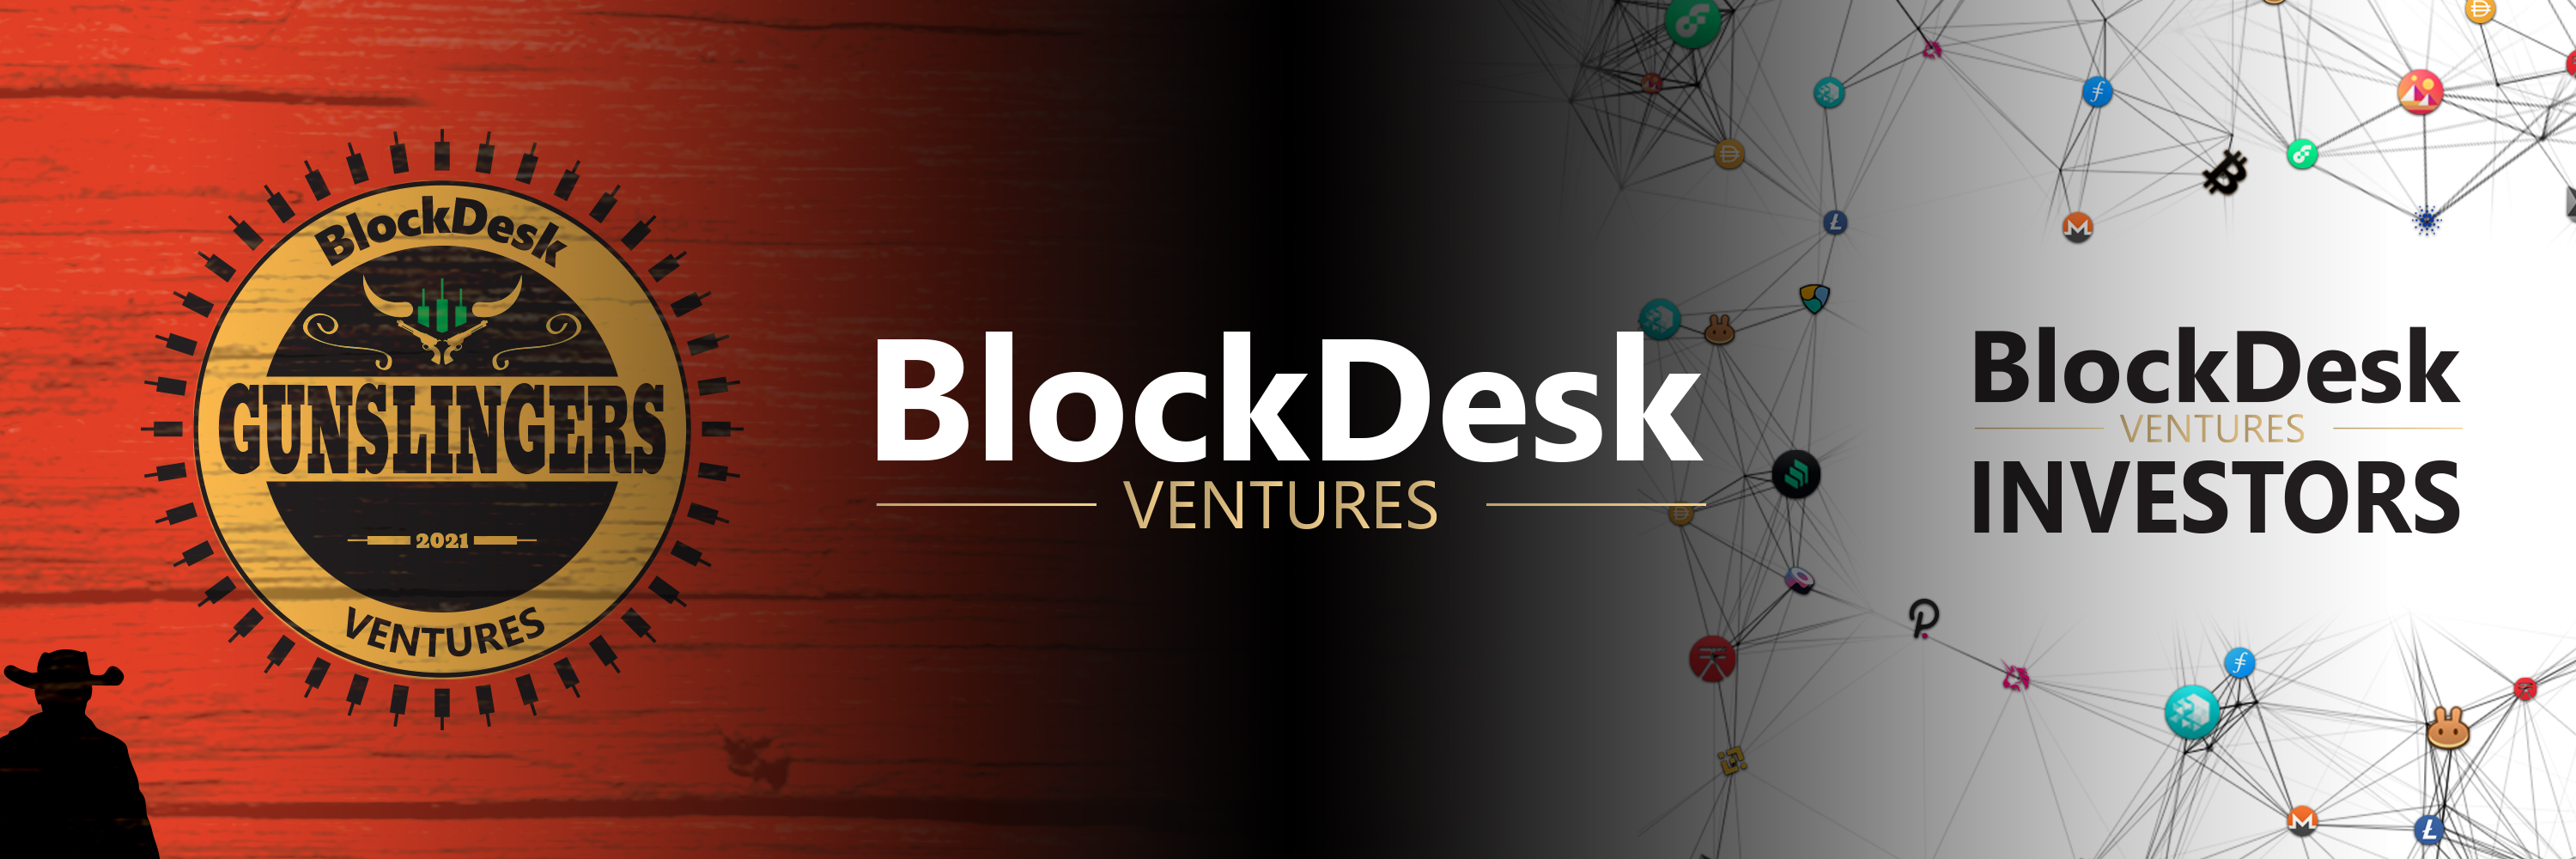 BlockDesk Ventures, Tuesday, July 6, 2021, Press release picture